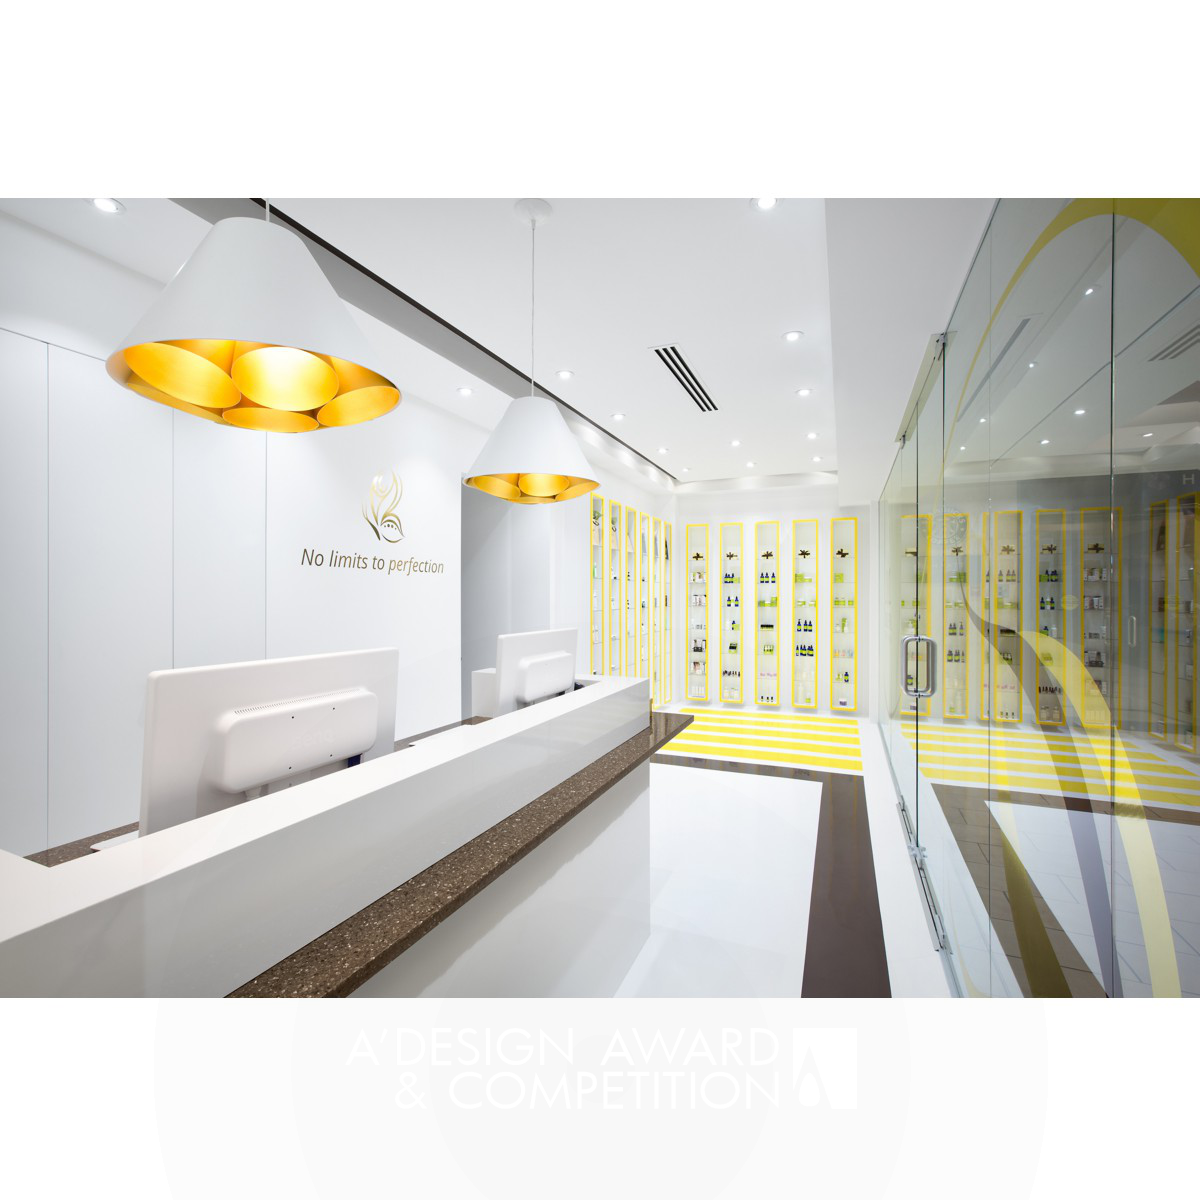 Life Luxe Spa Retail and Wellness Center by Maria Drugoveiko